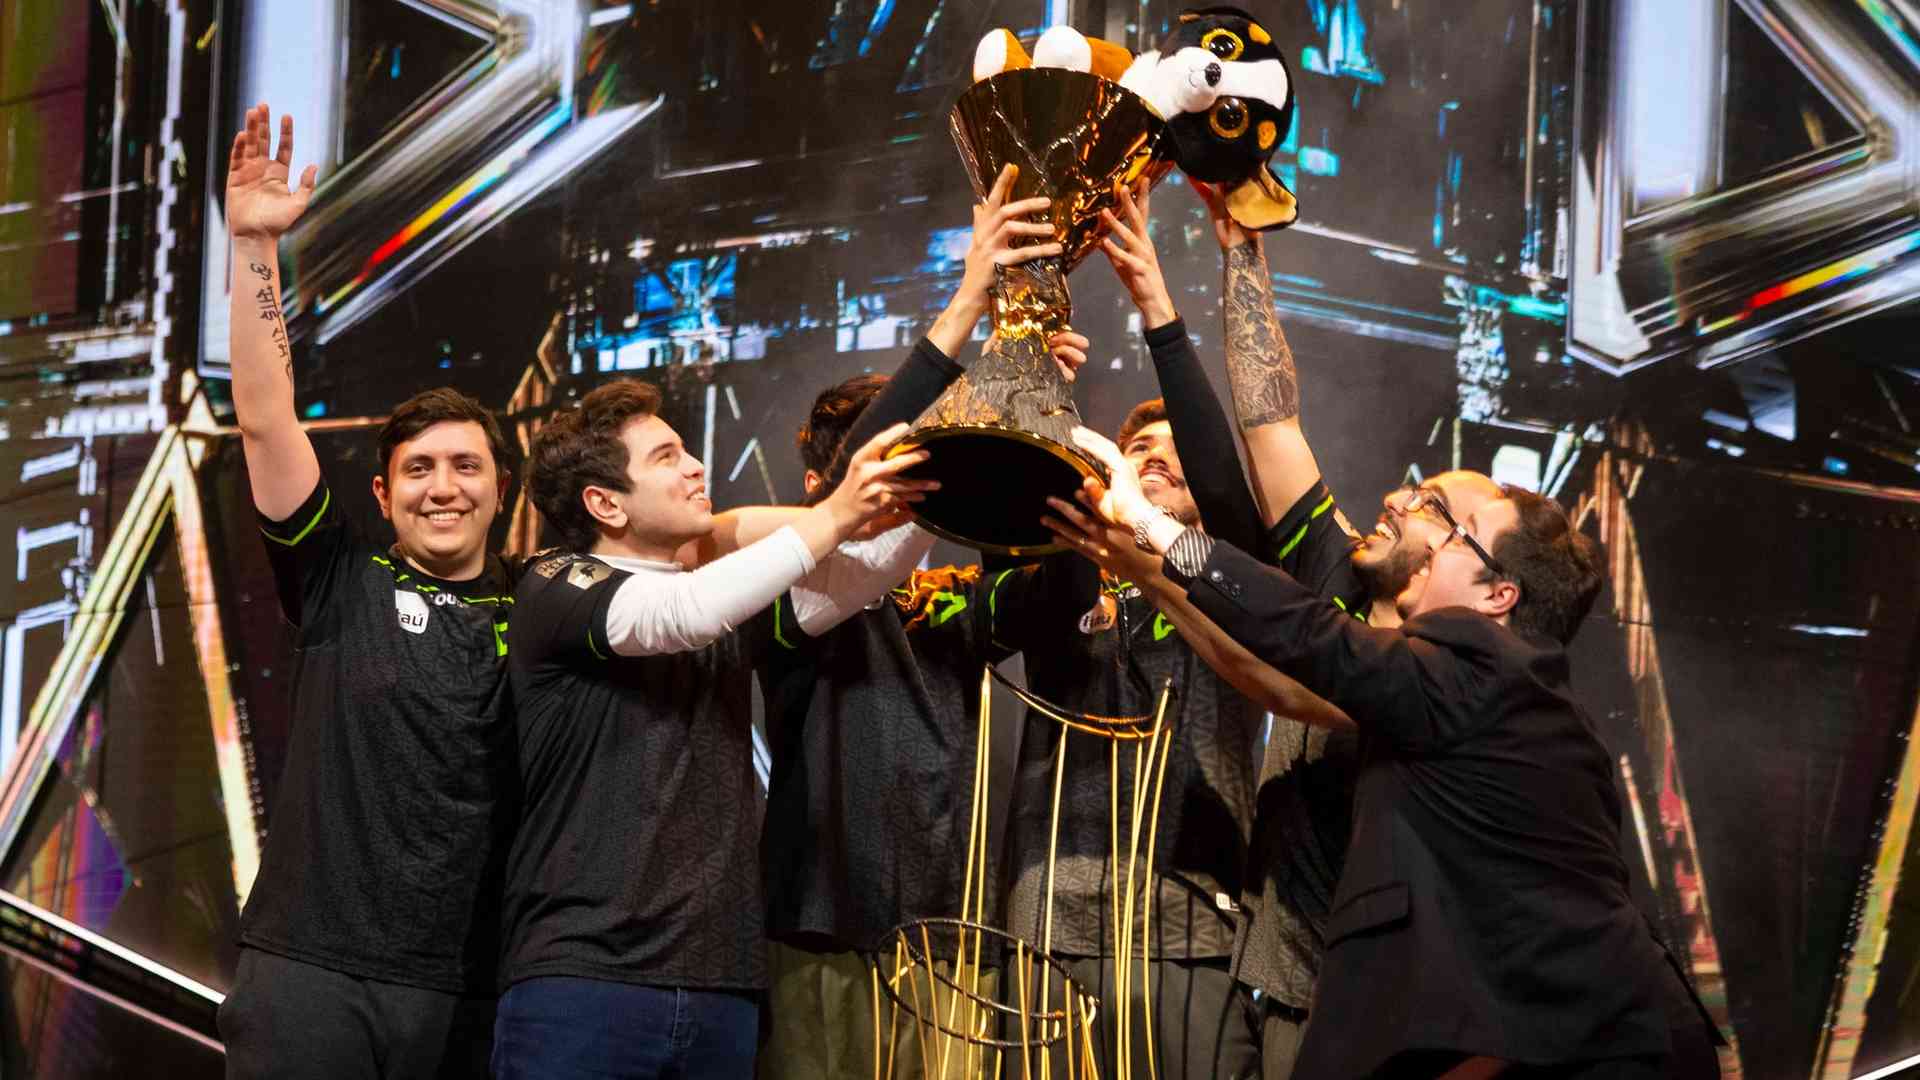 VALORANT: Top 5 Storylines for VCT Champions 2023 - Esports Illustrated